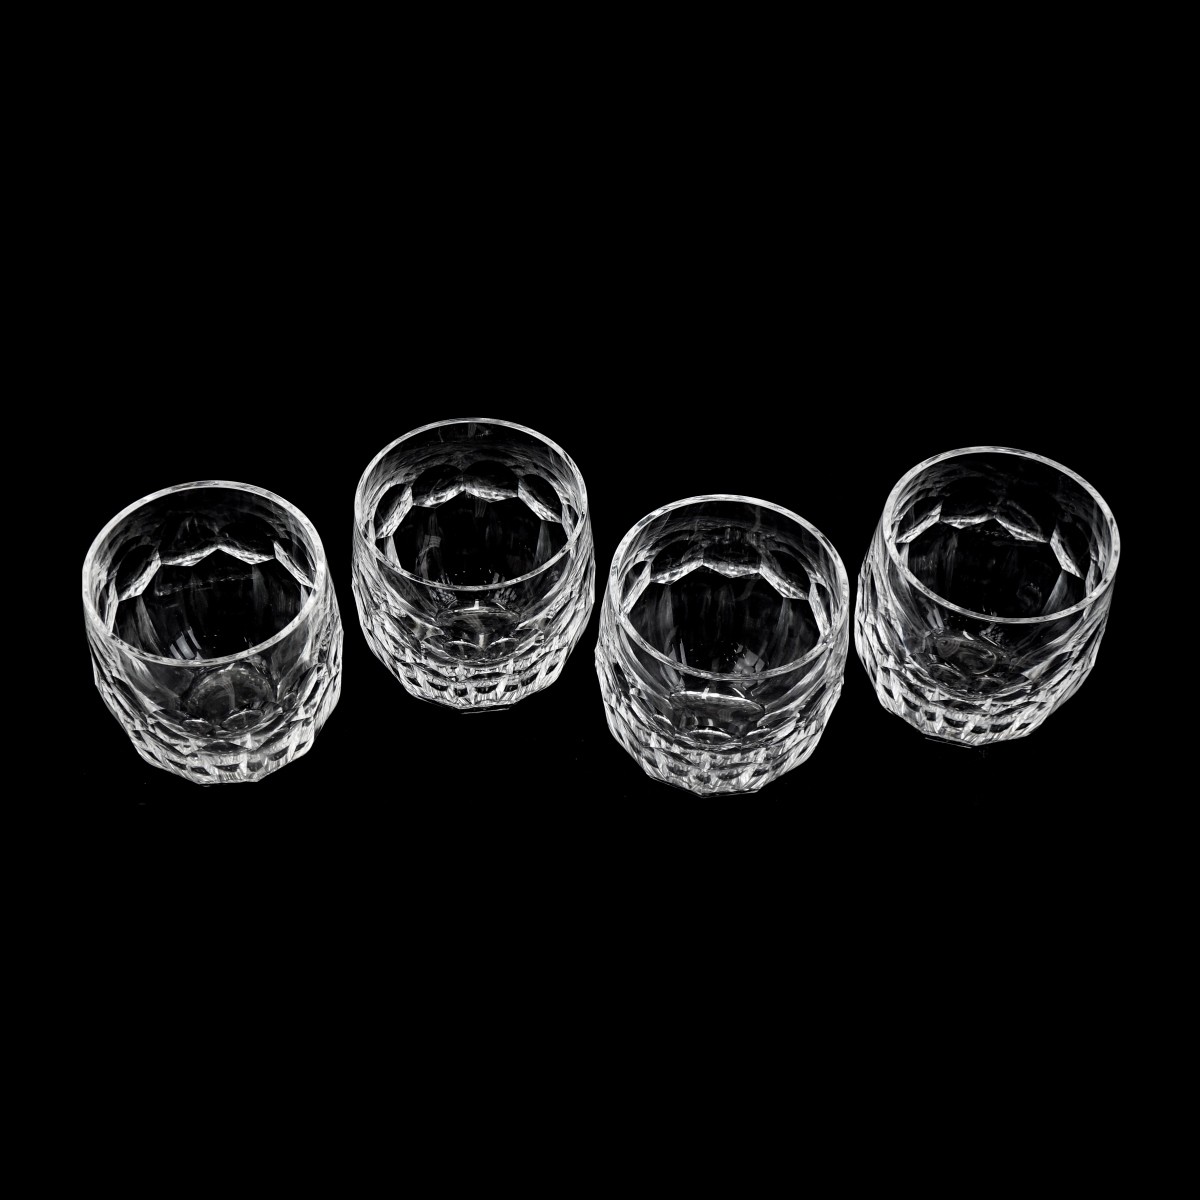 Waterford Curraghmore Old Fashioned Glasses